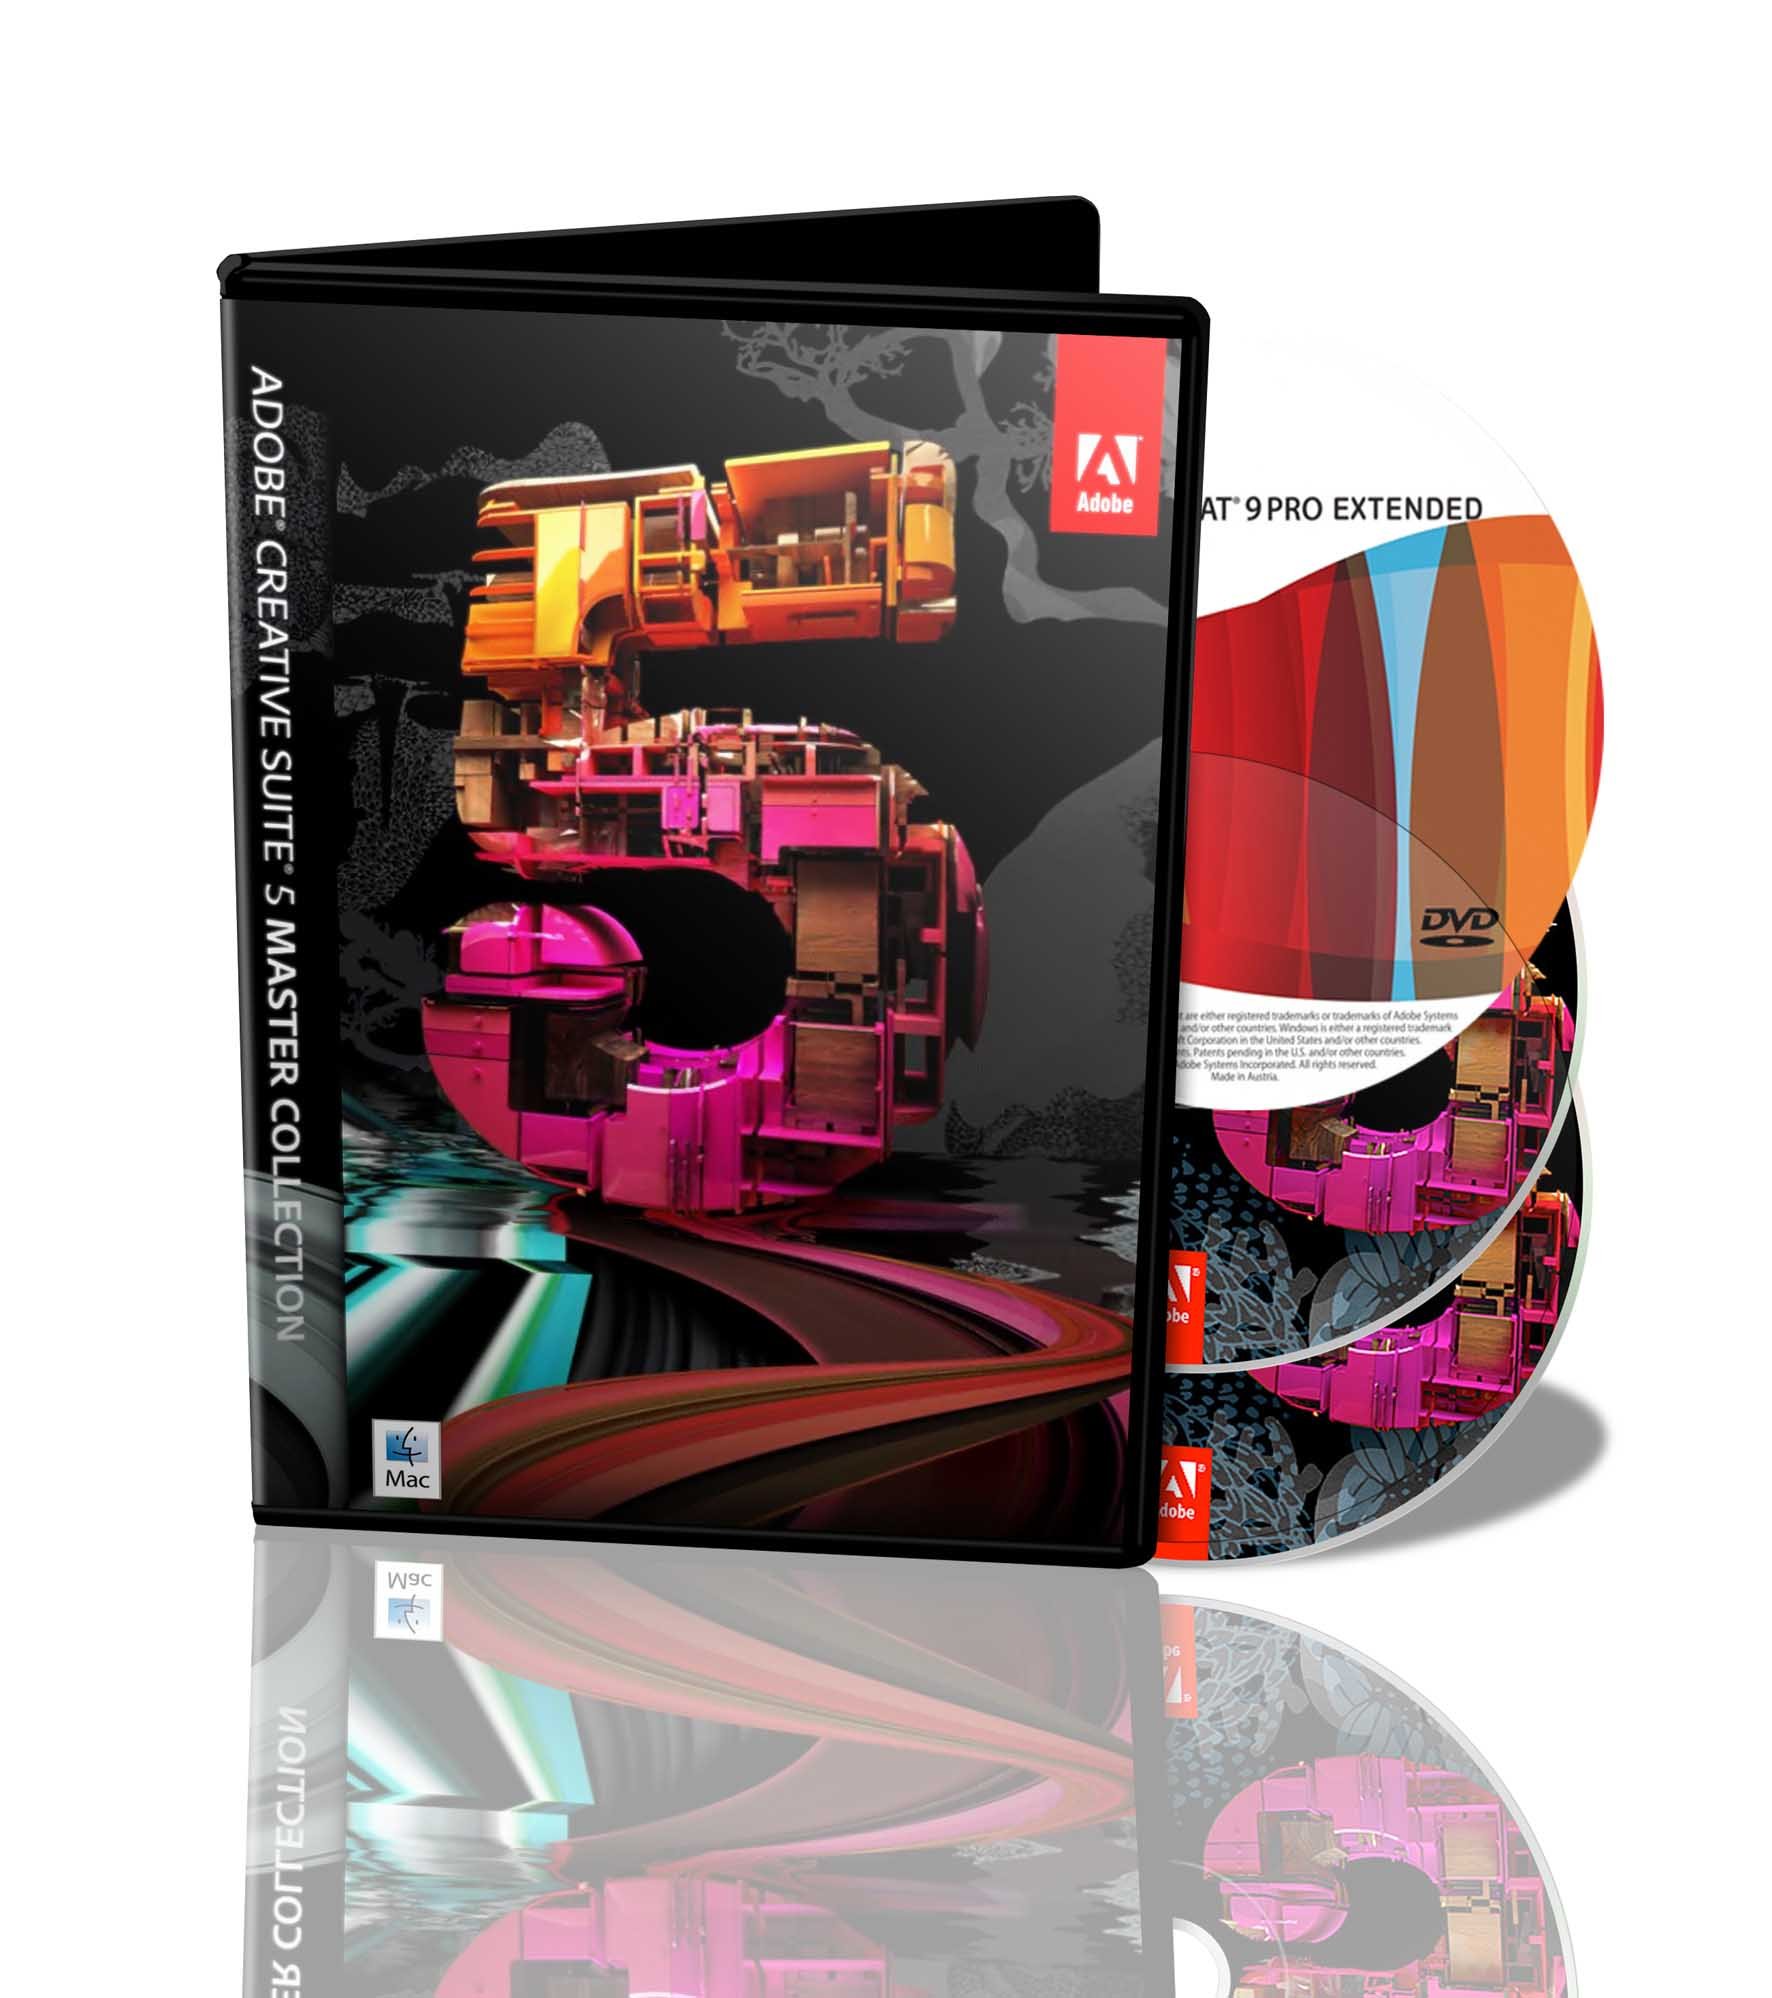 Adobe Indesign Cs2 Patch Free Download